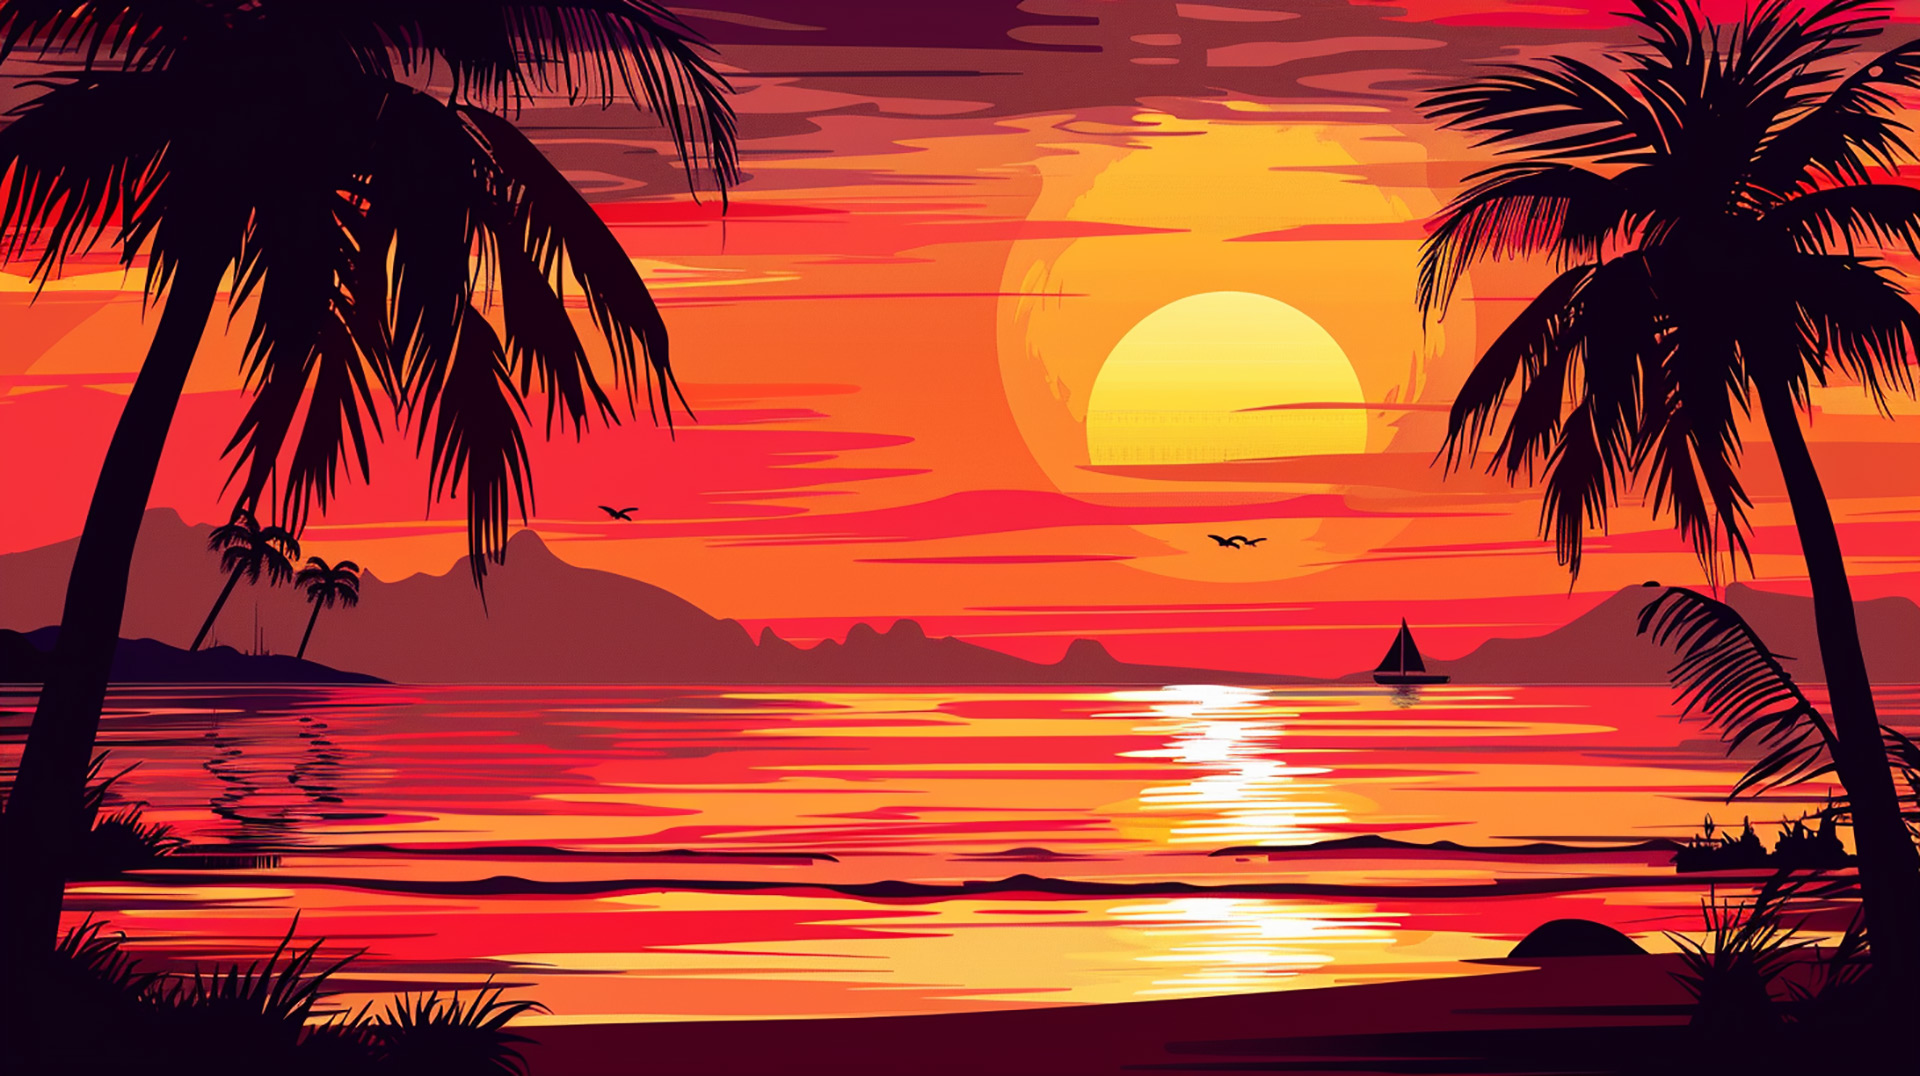 Island Dreaming: Tropical Beach Sunset Escapes